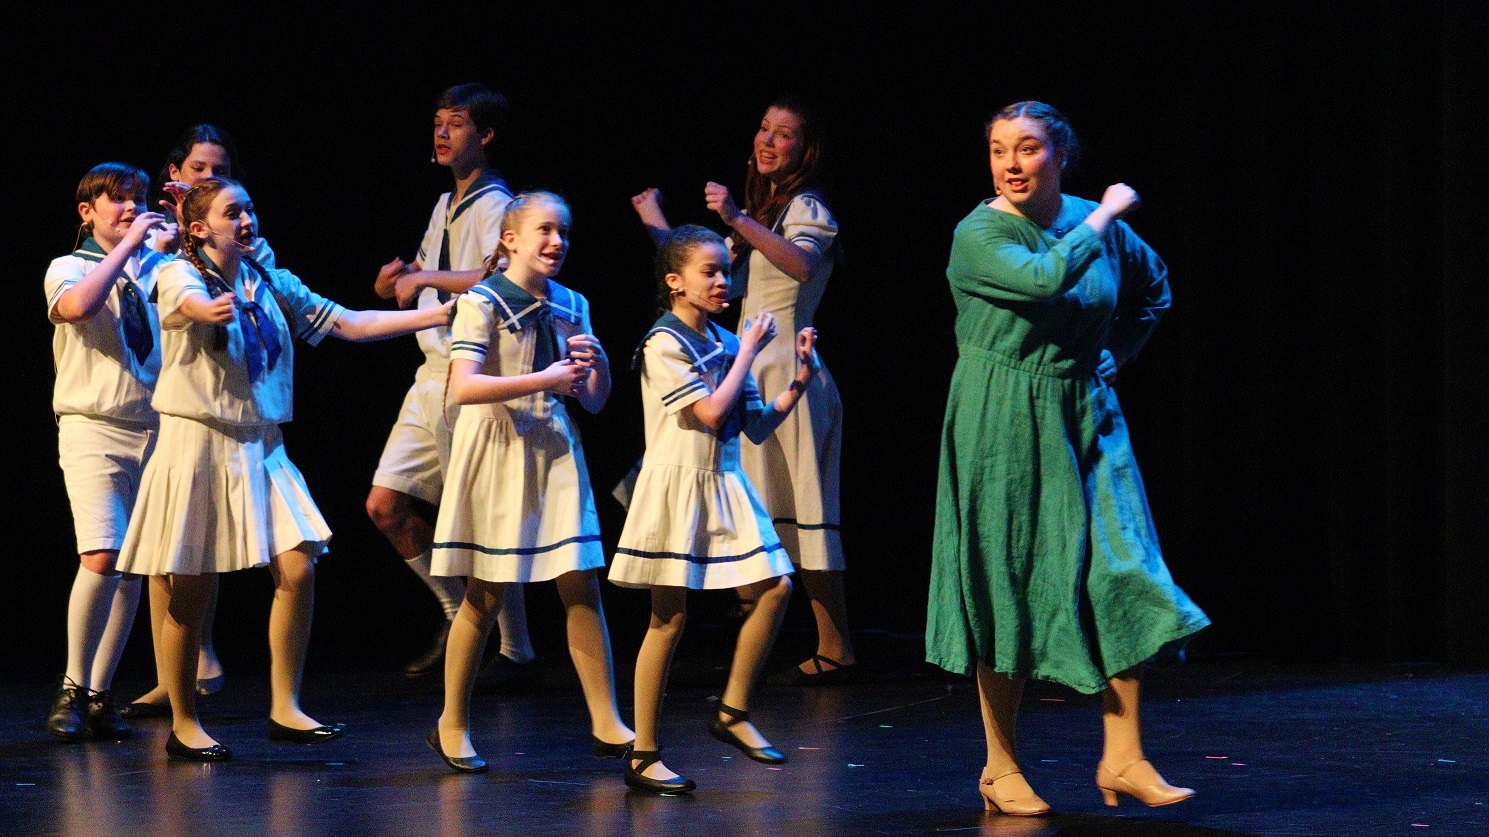 Maria and the Von Trapp children dancing during the Sound of Music